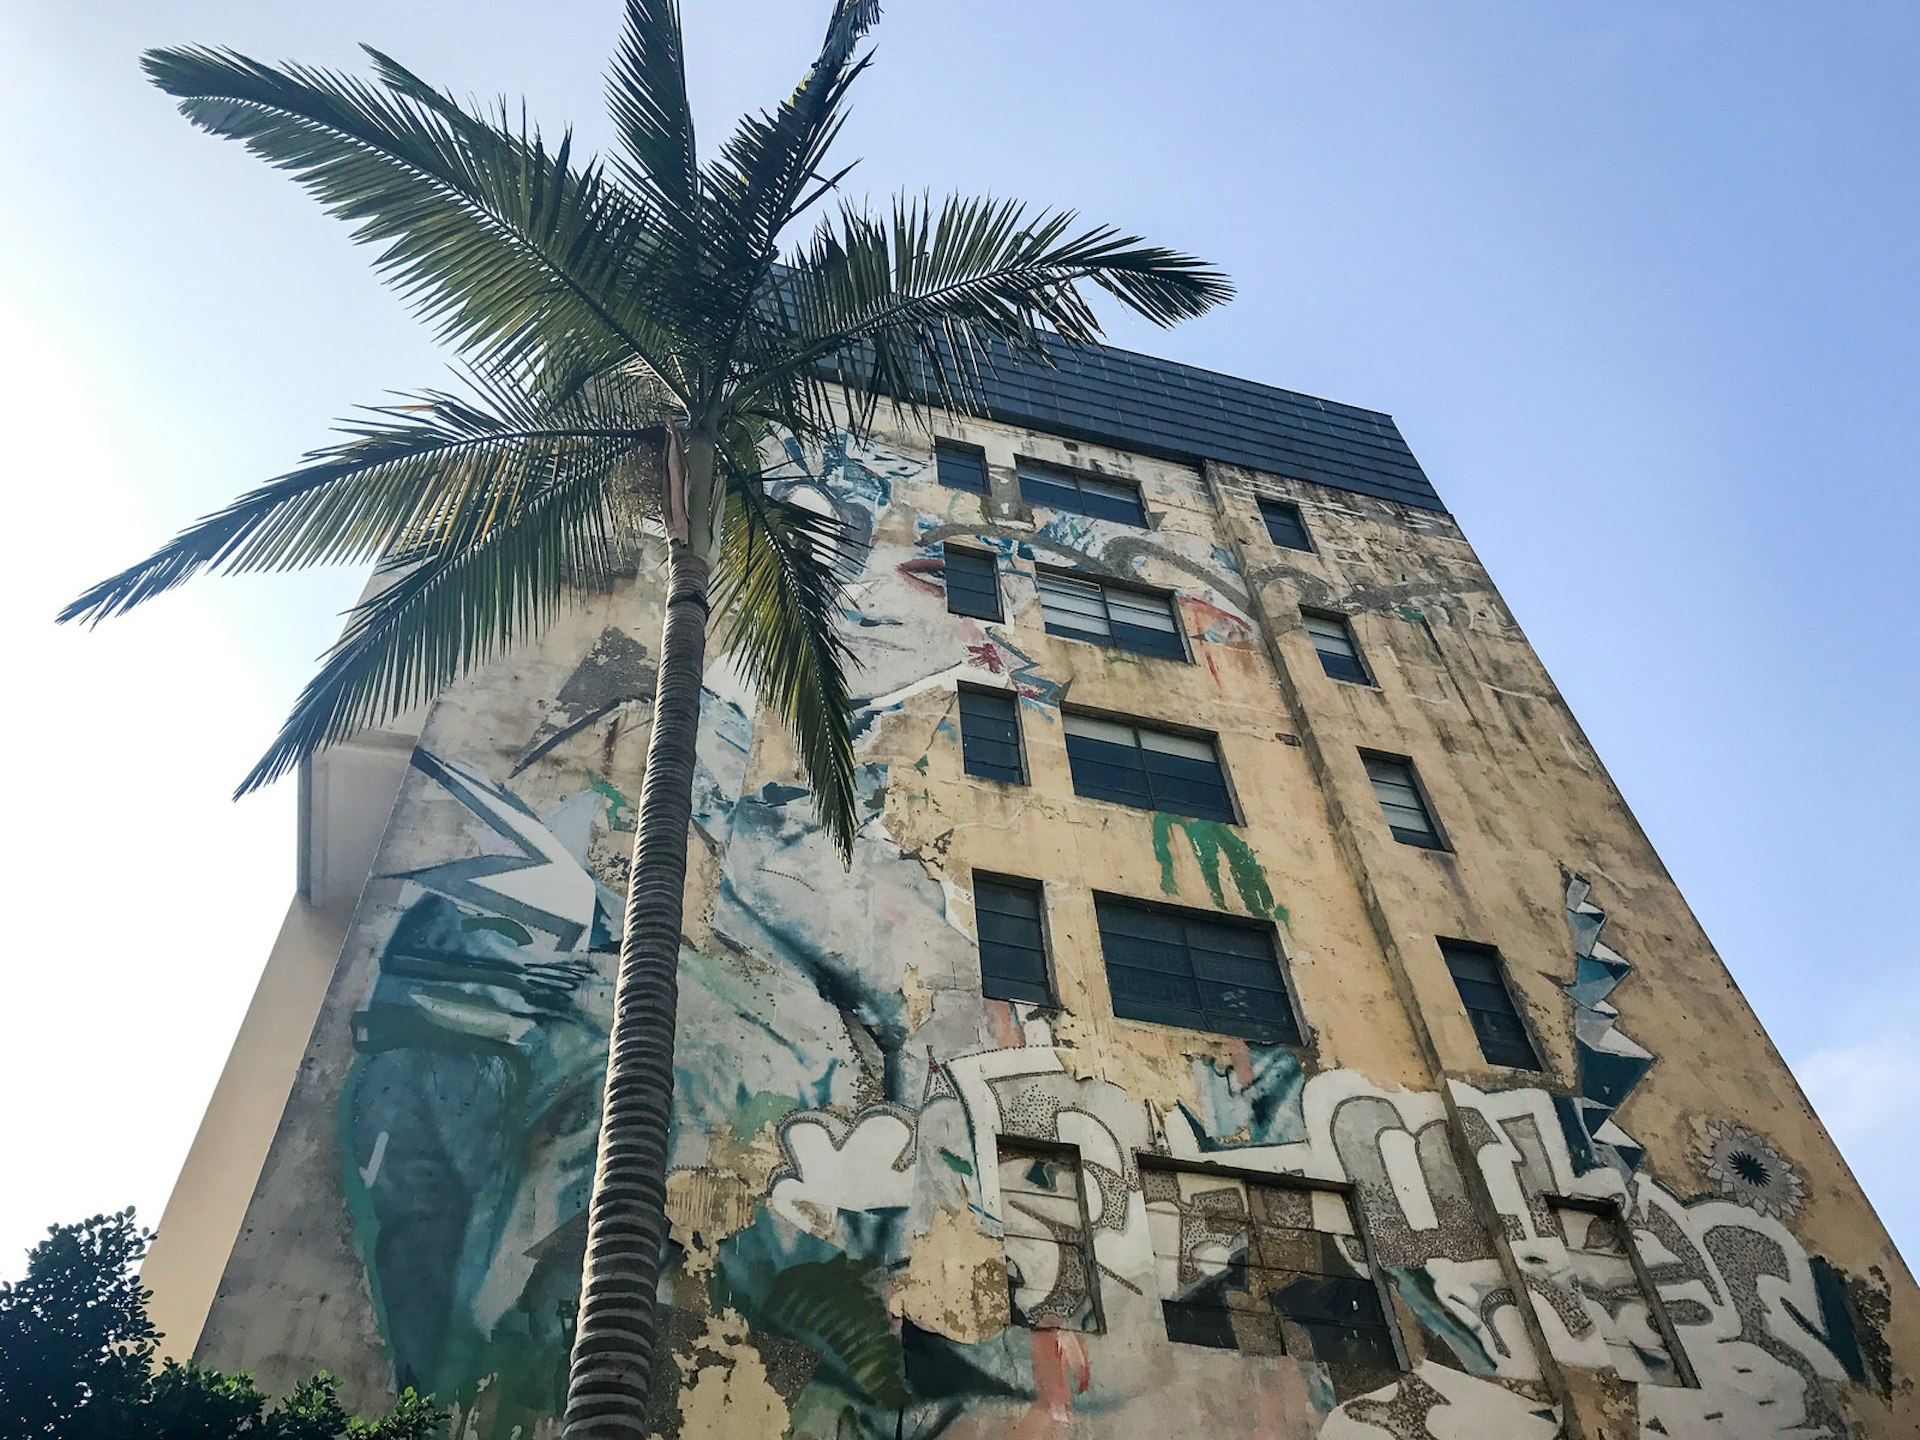 A palm tree in front of a shabby multi-storey factory building adorned in street art and graffiti. OCT Loft has renewed Shenzhen's old factory buildings, transforming them into galleries and art spaces © Cathy Adams / Lonely Planet